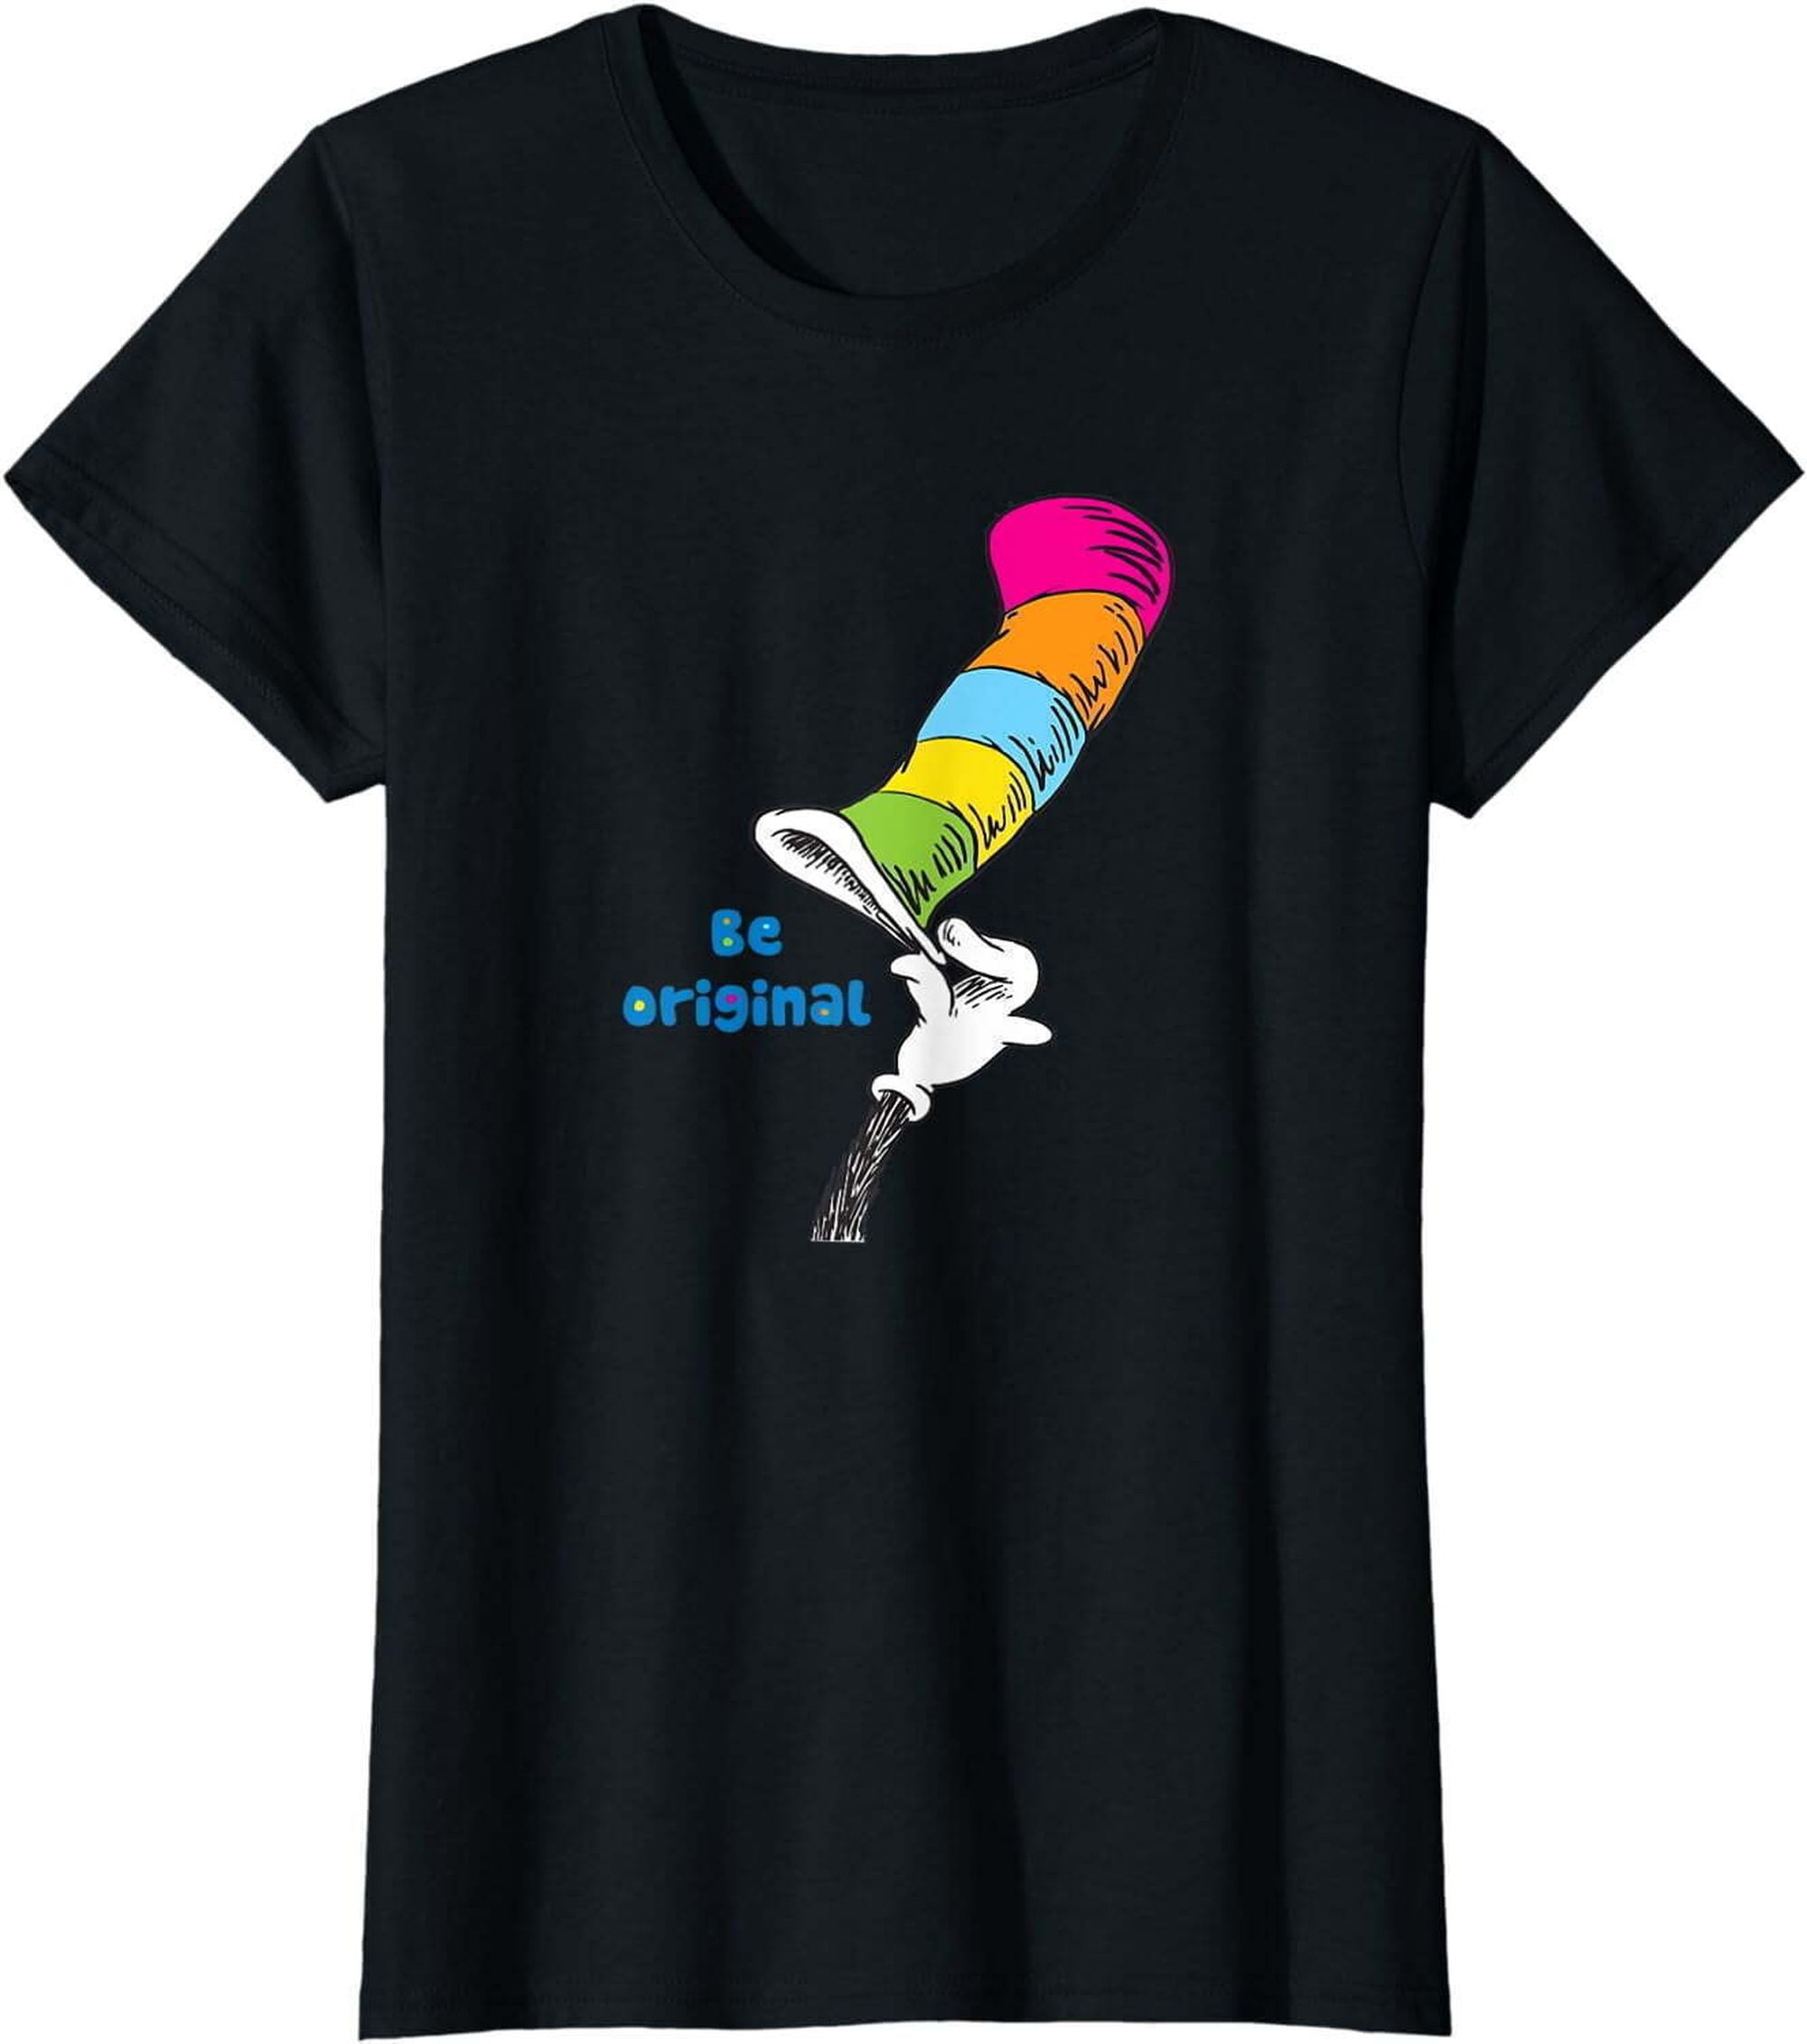 Original Black Short Sleeve Tee: Celebrate with Dr. Seuss Party Shirts ...